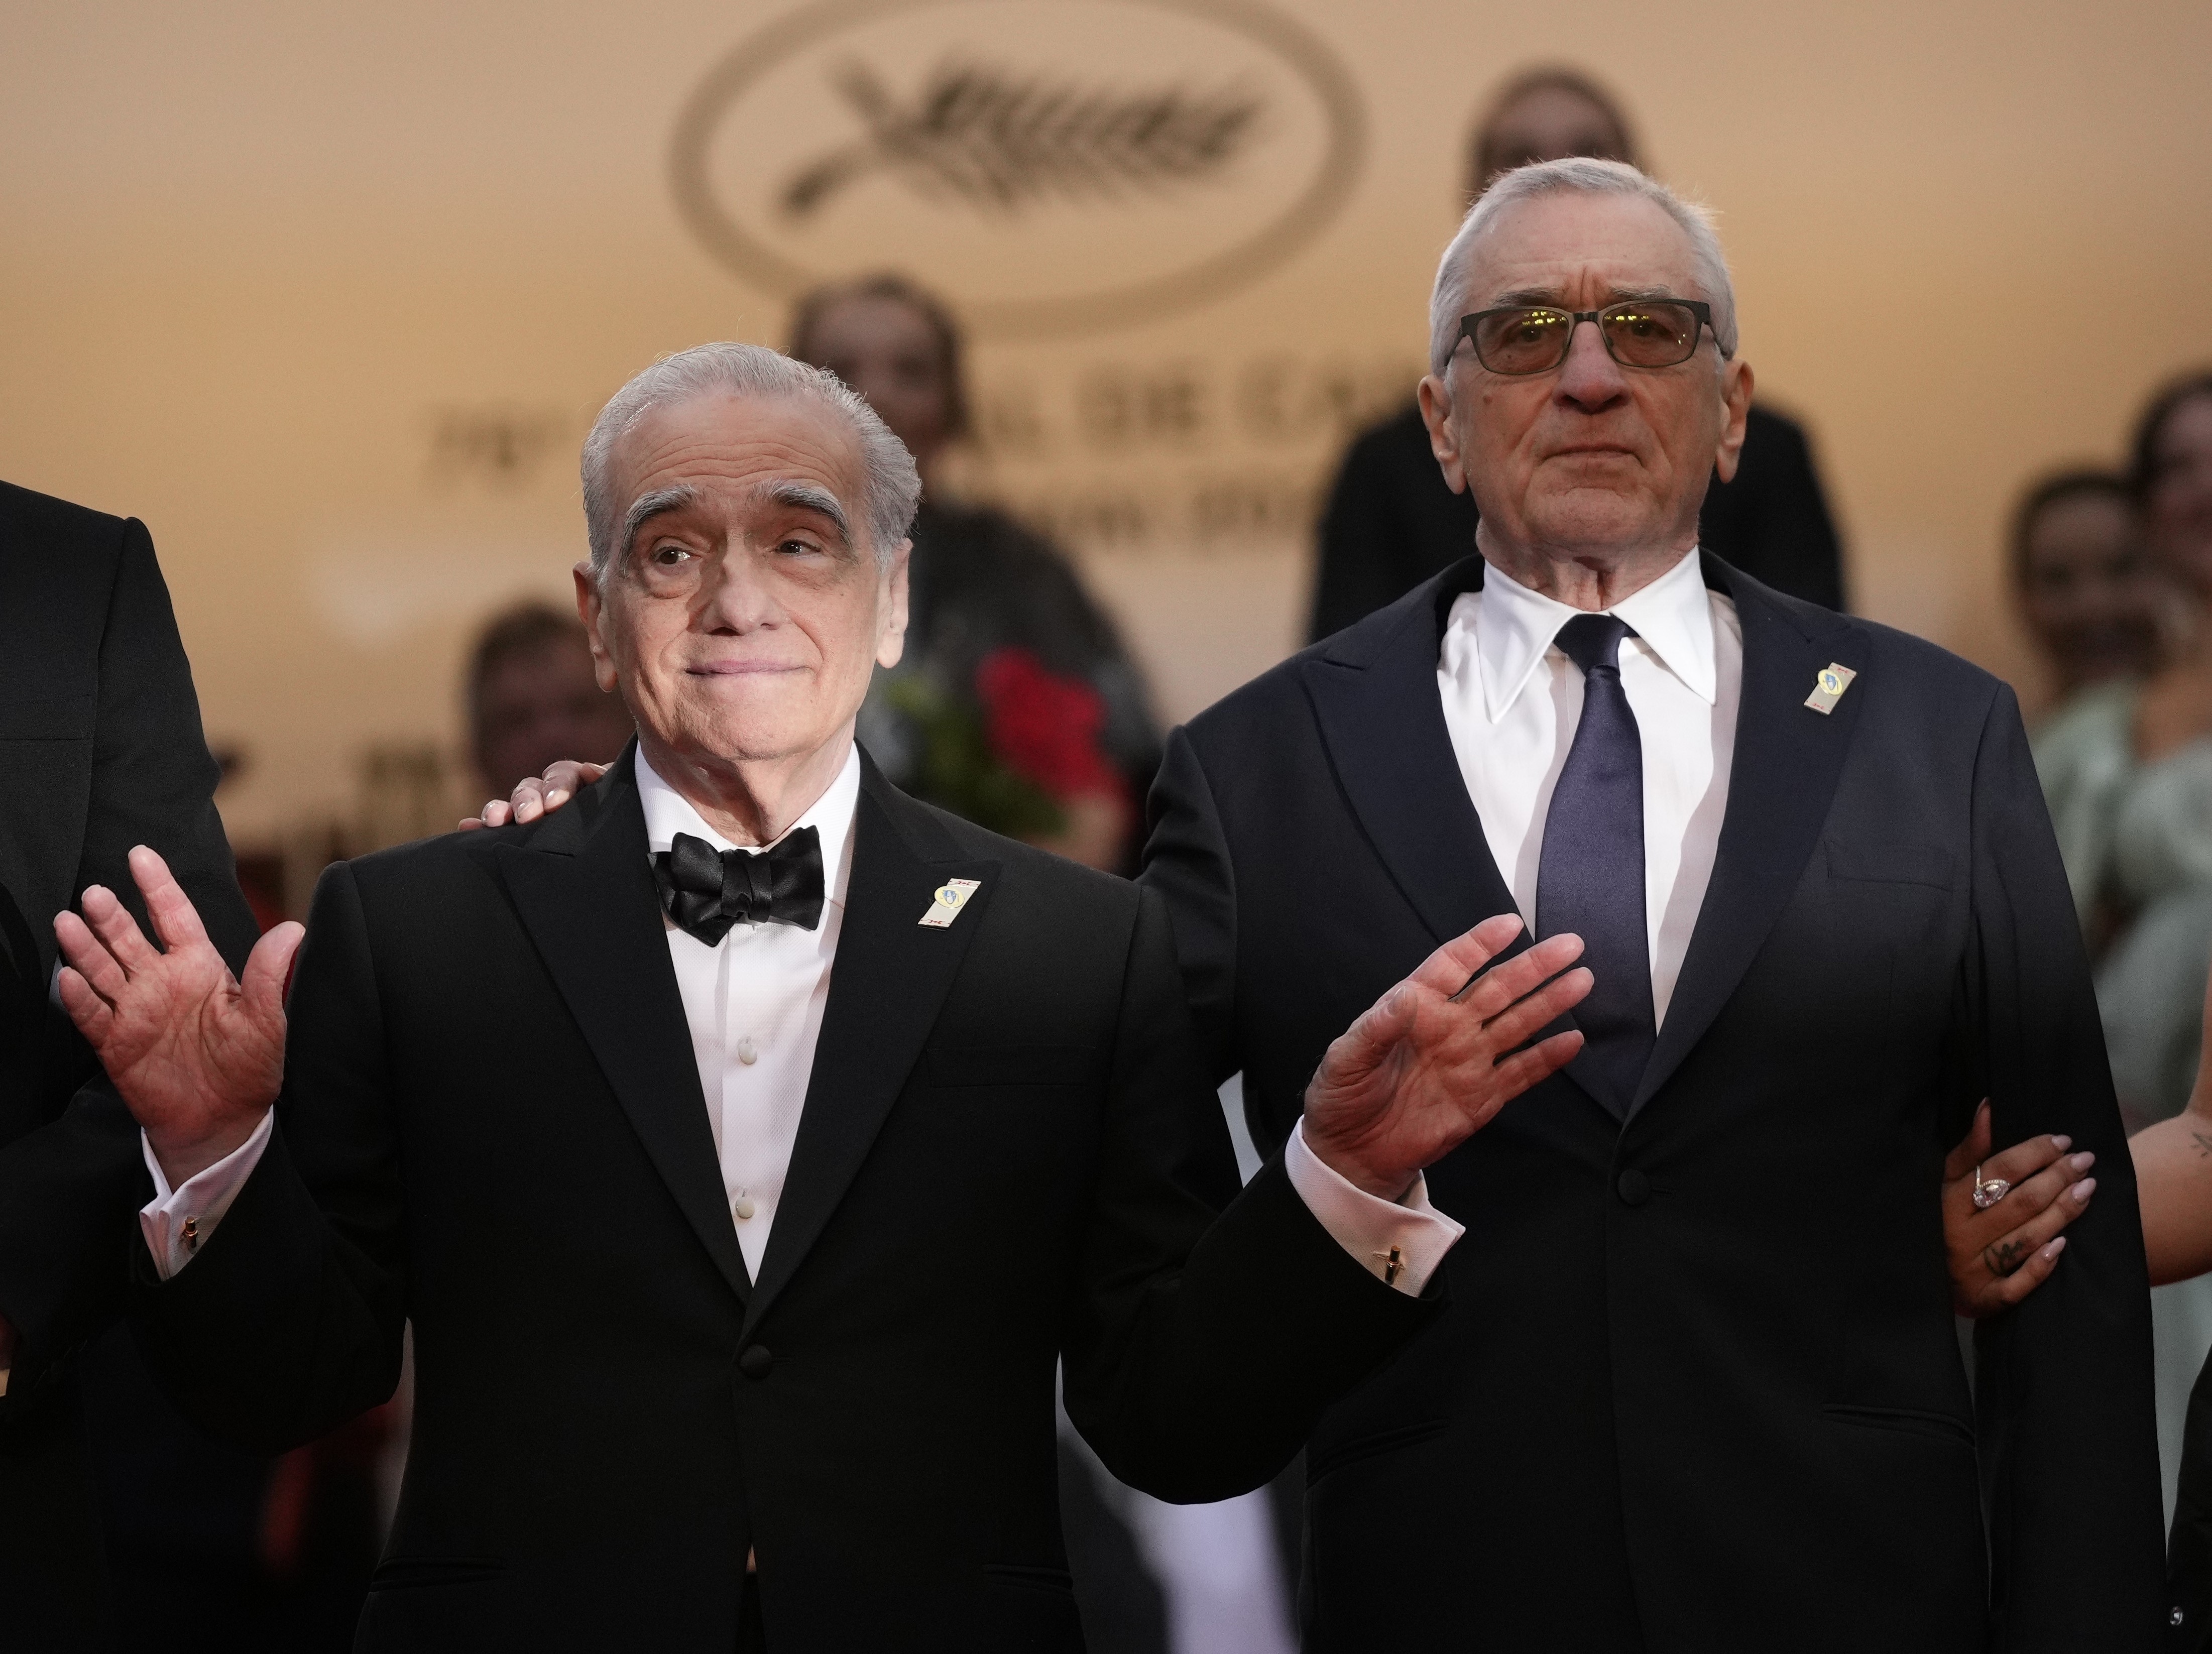 Scorsese debuts 'Killers of the Flower Moon' in Cannes to thunderous  applause - North Shore News